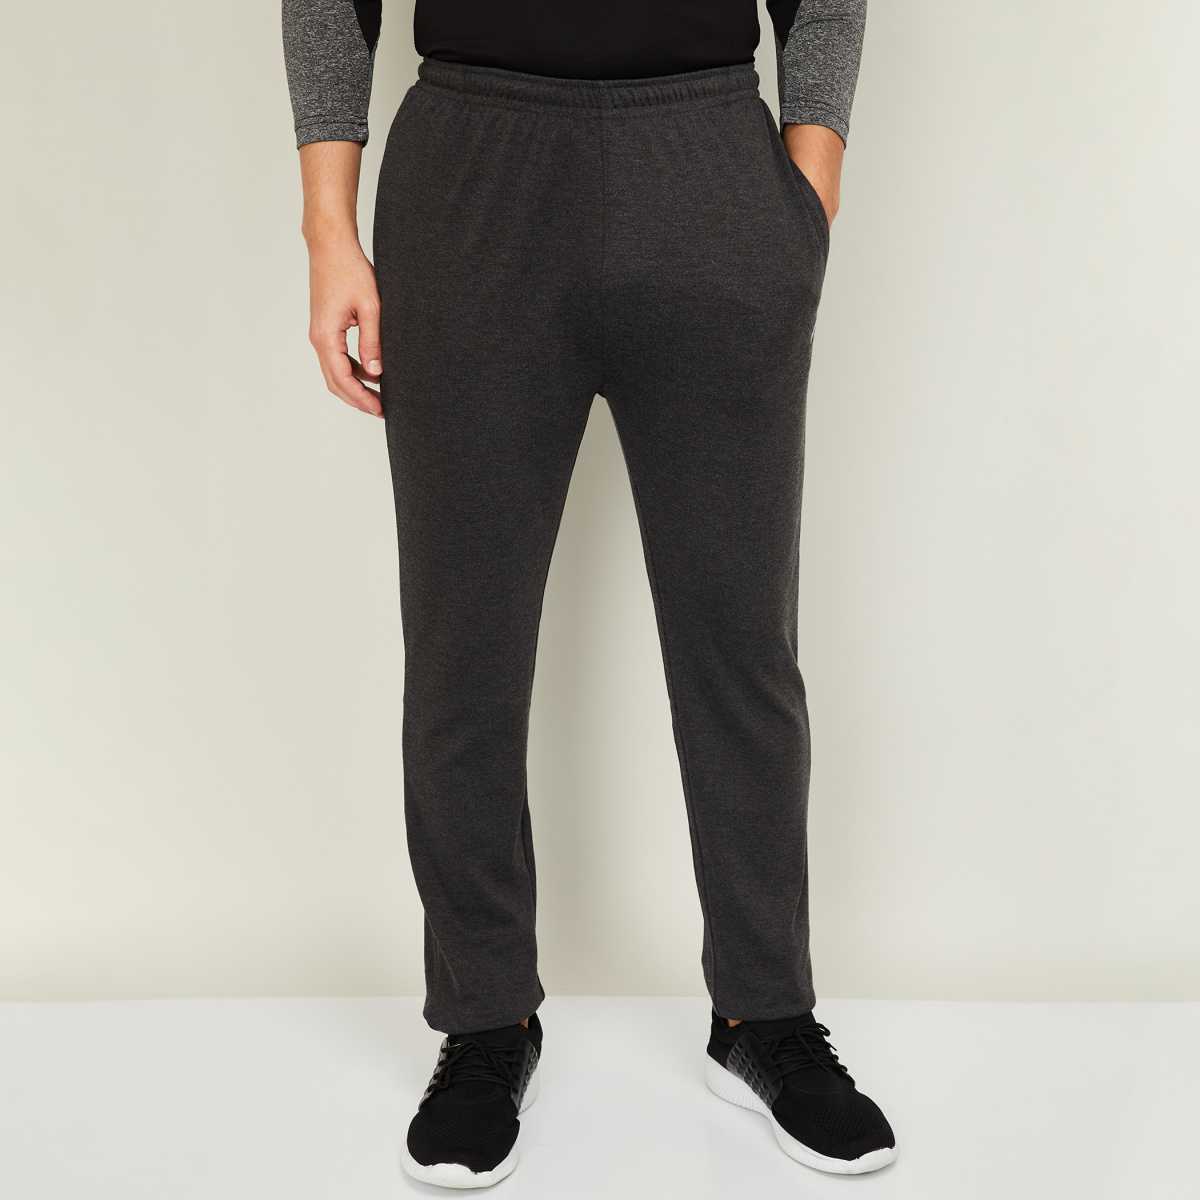 Chromozome Track Pants - Buy Chromozome Track Pants Online at Best Prices  In India | Flipkart.com